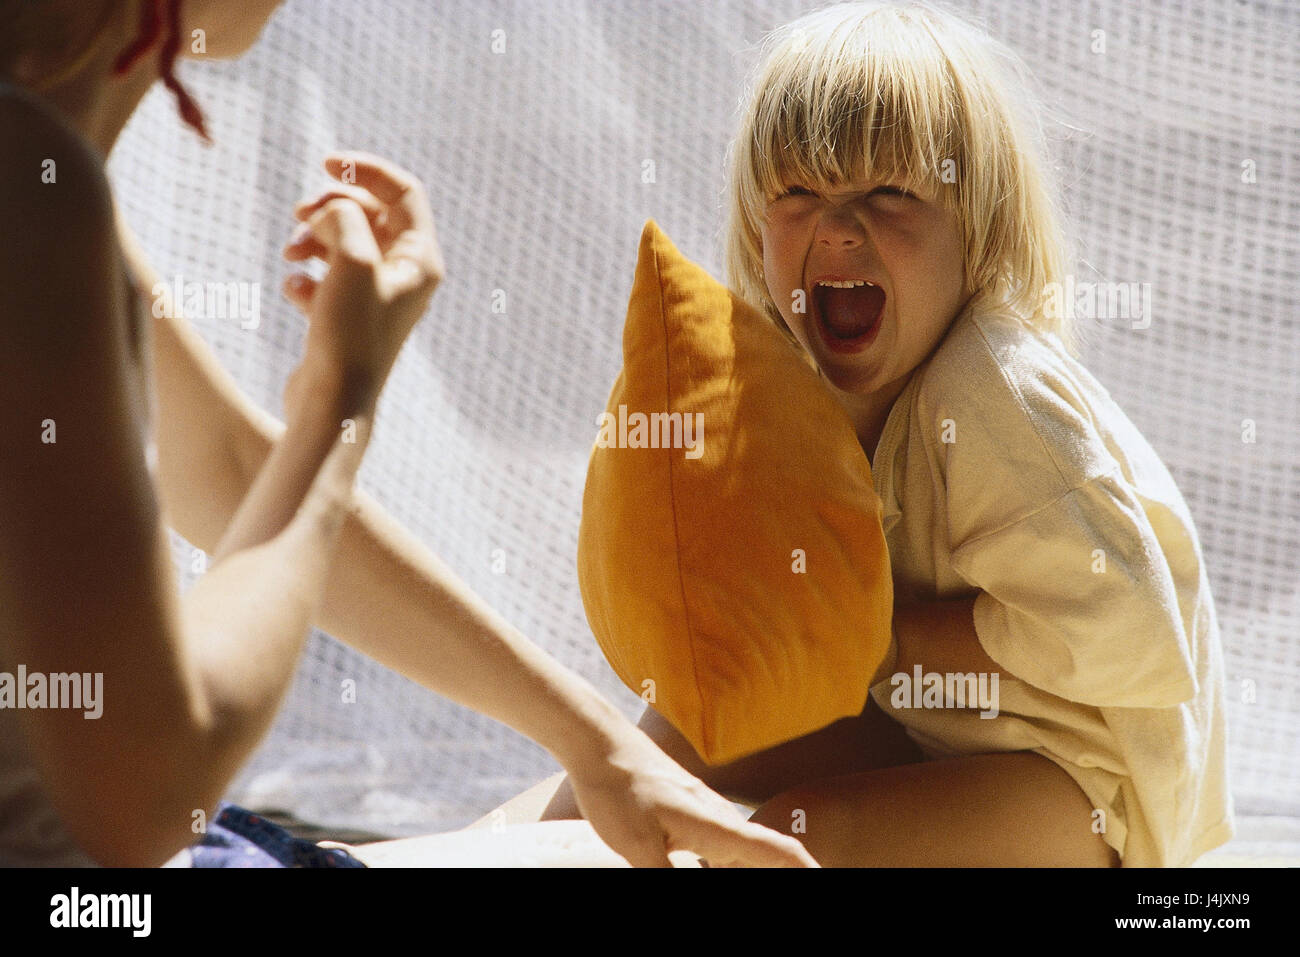 Children, argue, shout at cushion battle, at detail nut, boy, girl, siblings, fight, conflict, aggressively Stock Photo